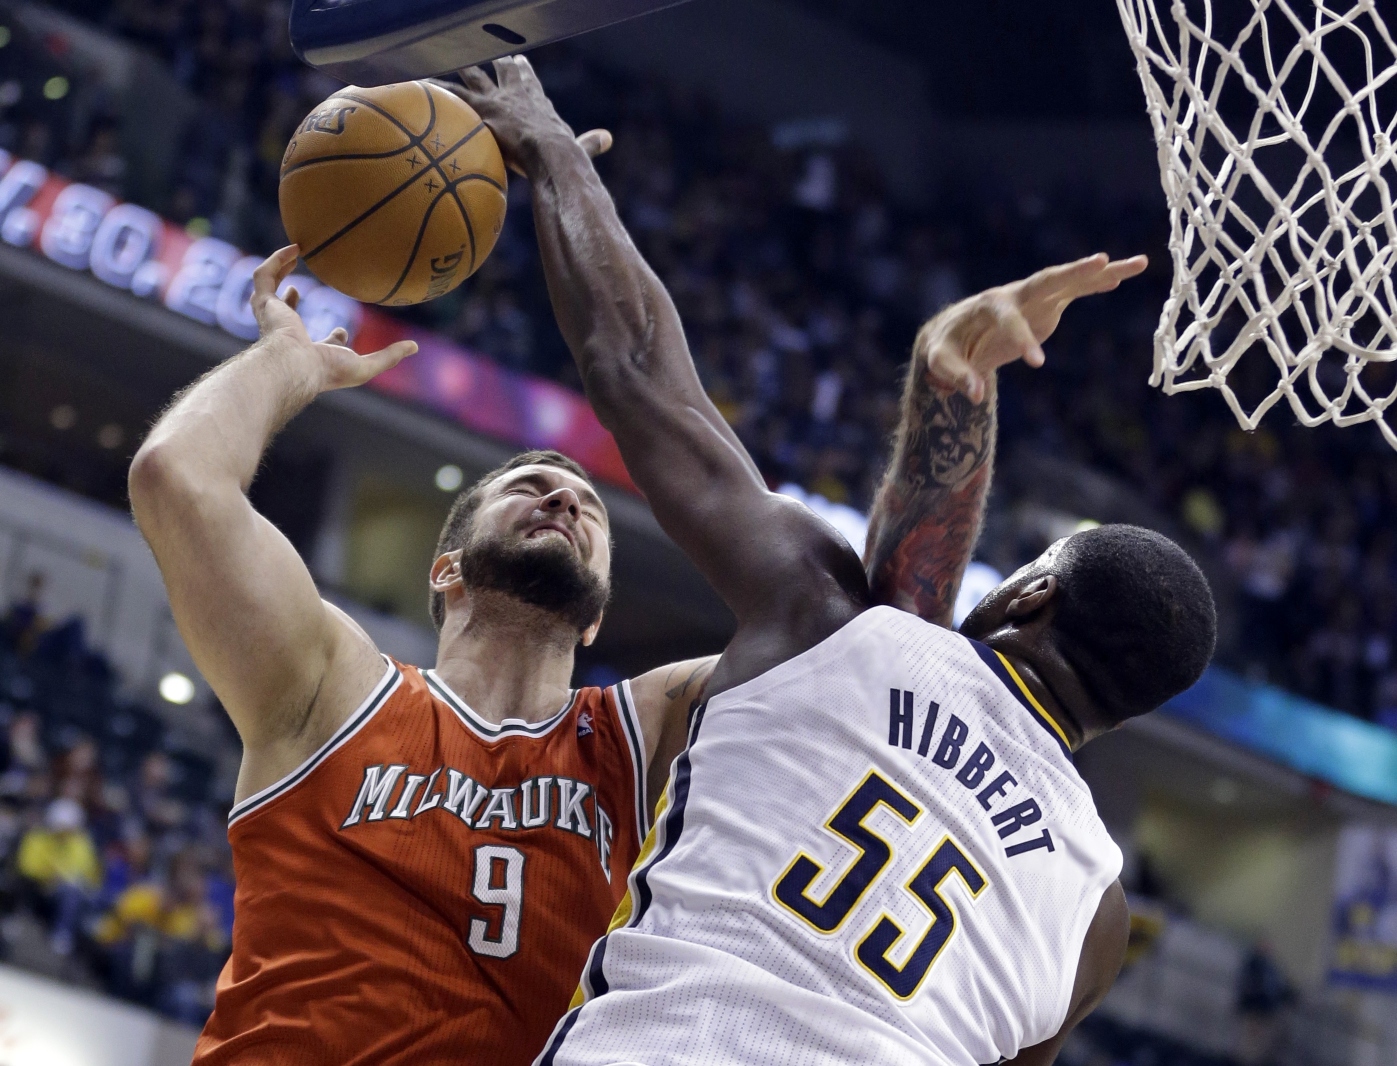 Indiana Pacers center Roy Hibbert blocks the shot of Milwaukee Bucks centre Miroslav Raduljica during the first half of an NBA game in Indianapolis. Photo: AP